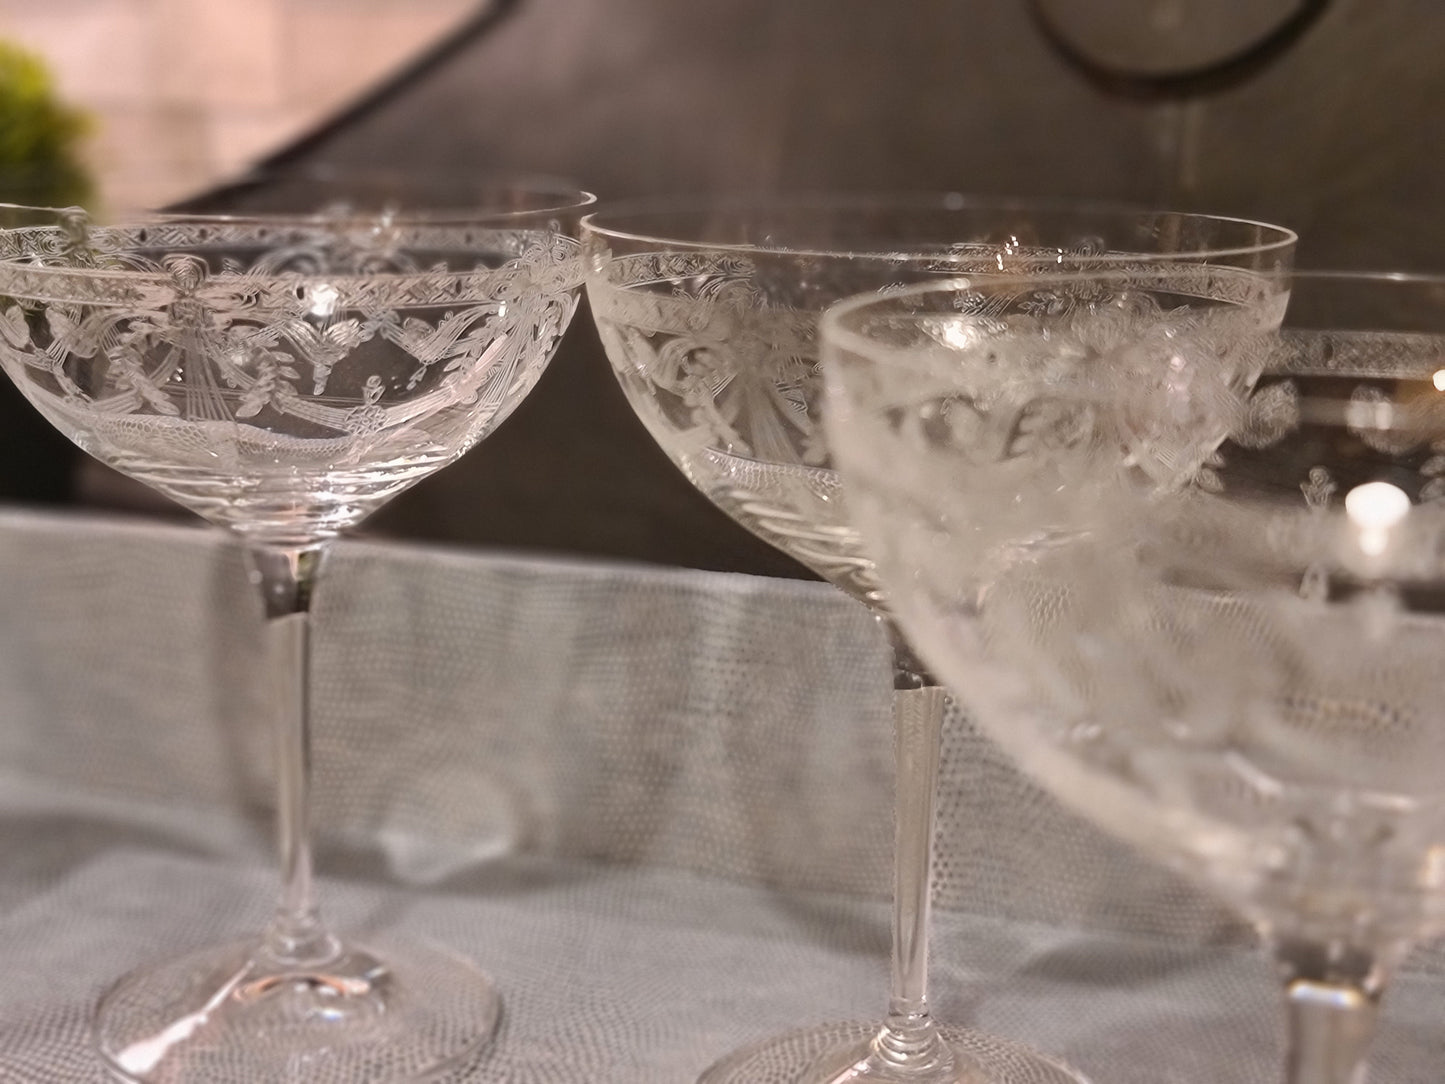 Victoria Engraved Crystal Coupe Set of 4